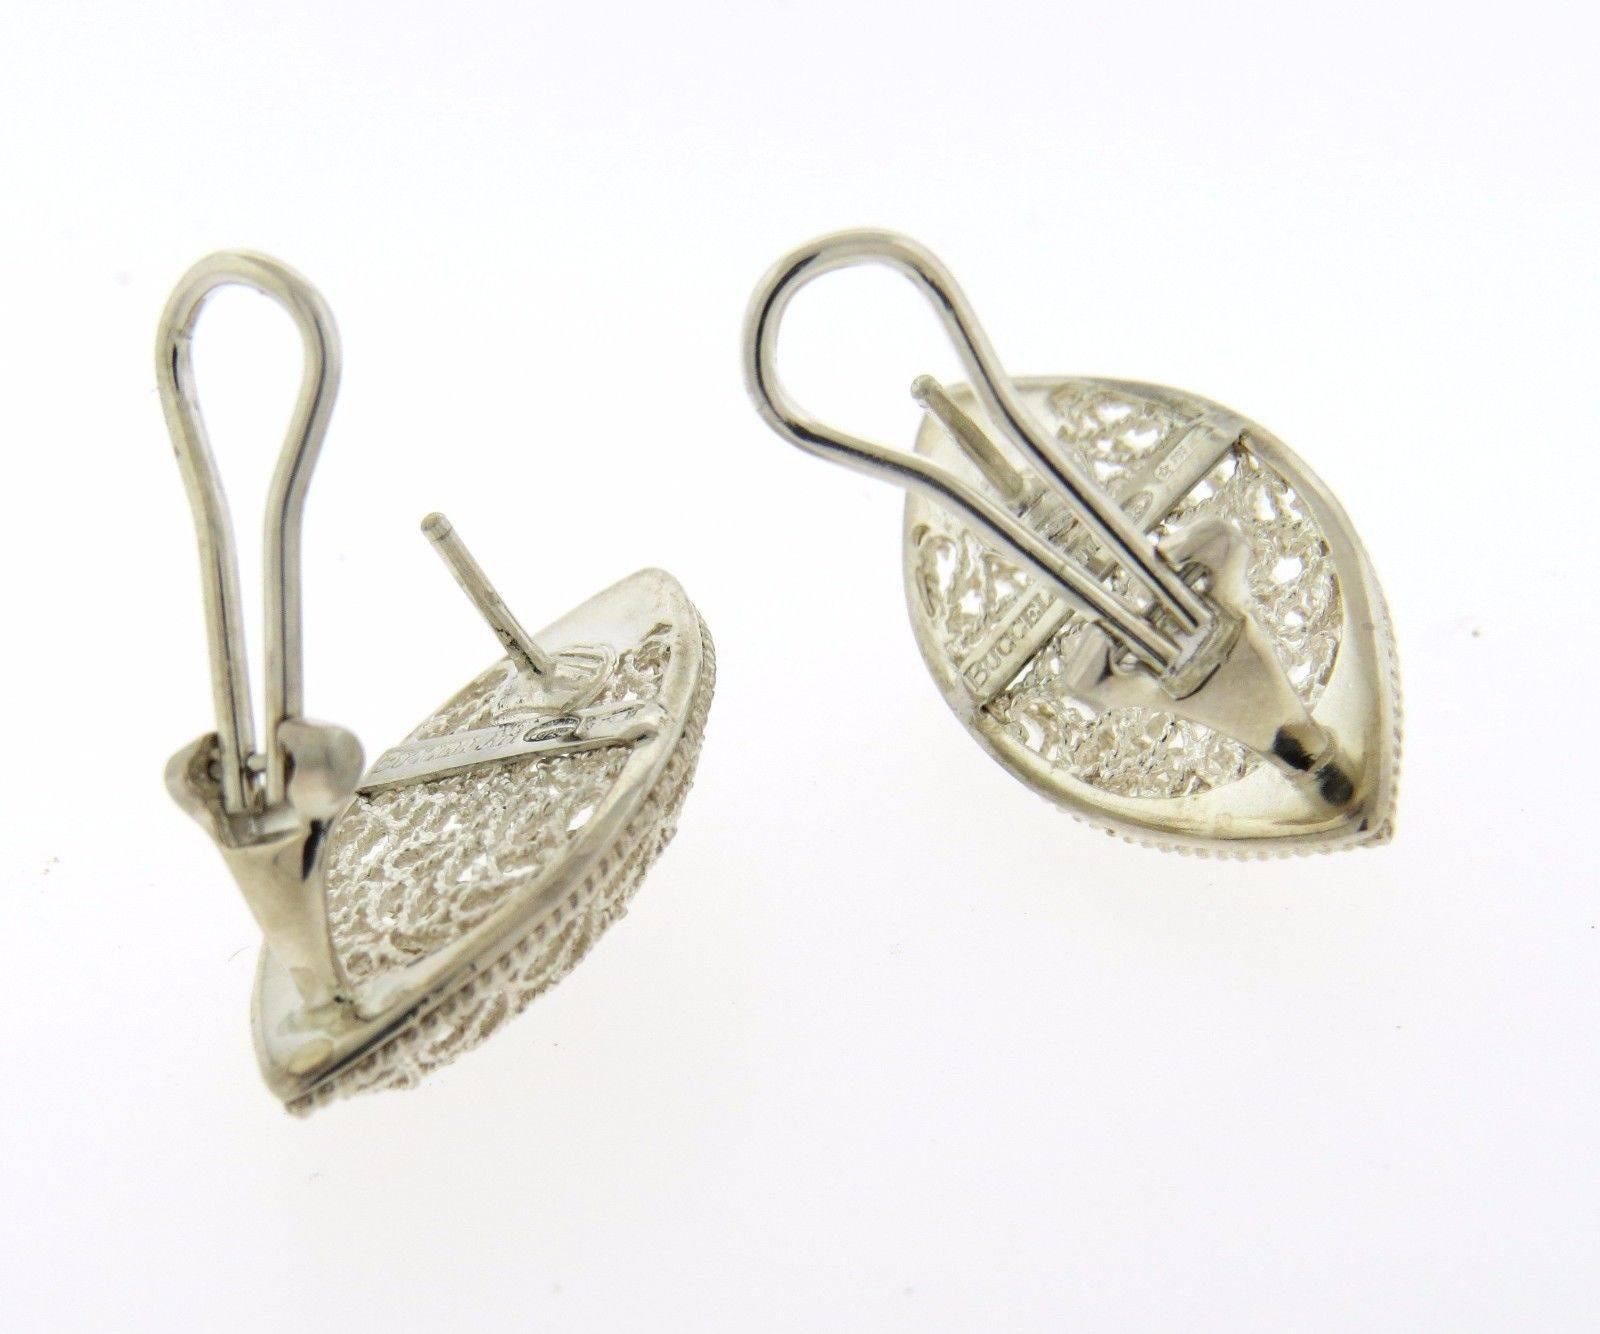 A pair of sterling silver earrings by Buccellati.  The earrings measure 29mm x 14.7mm and weigh 7.3 grams.  Marked: Buccellati Italy 925.  The earrings come with Buccellati paperwork.